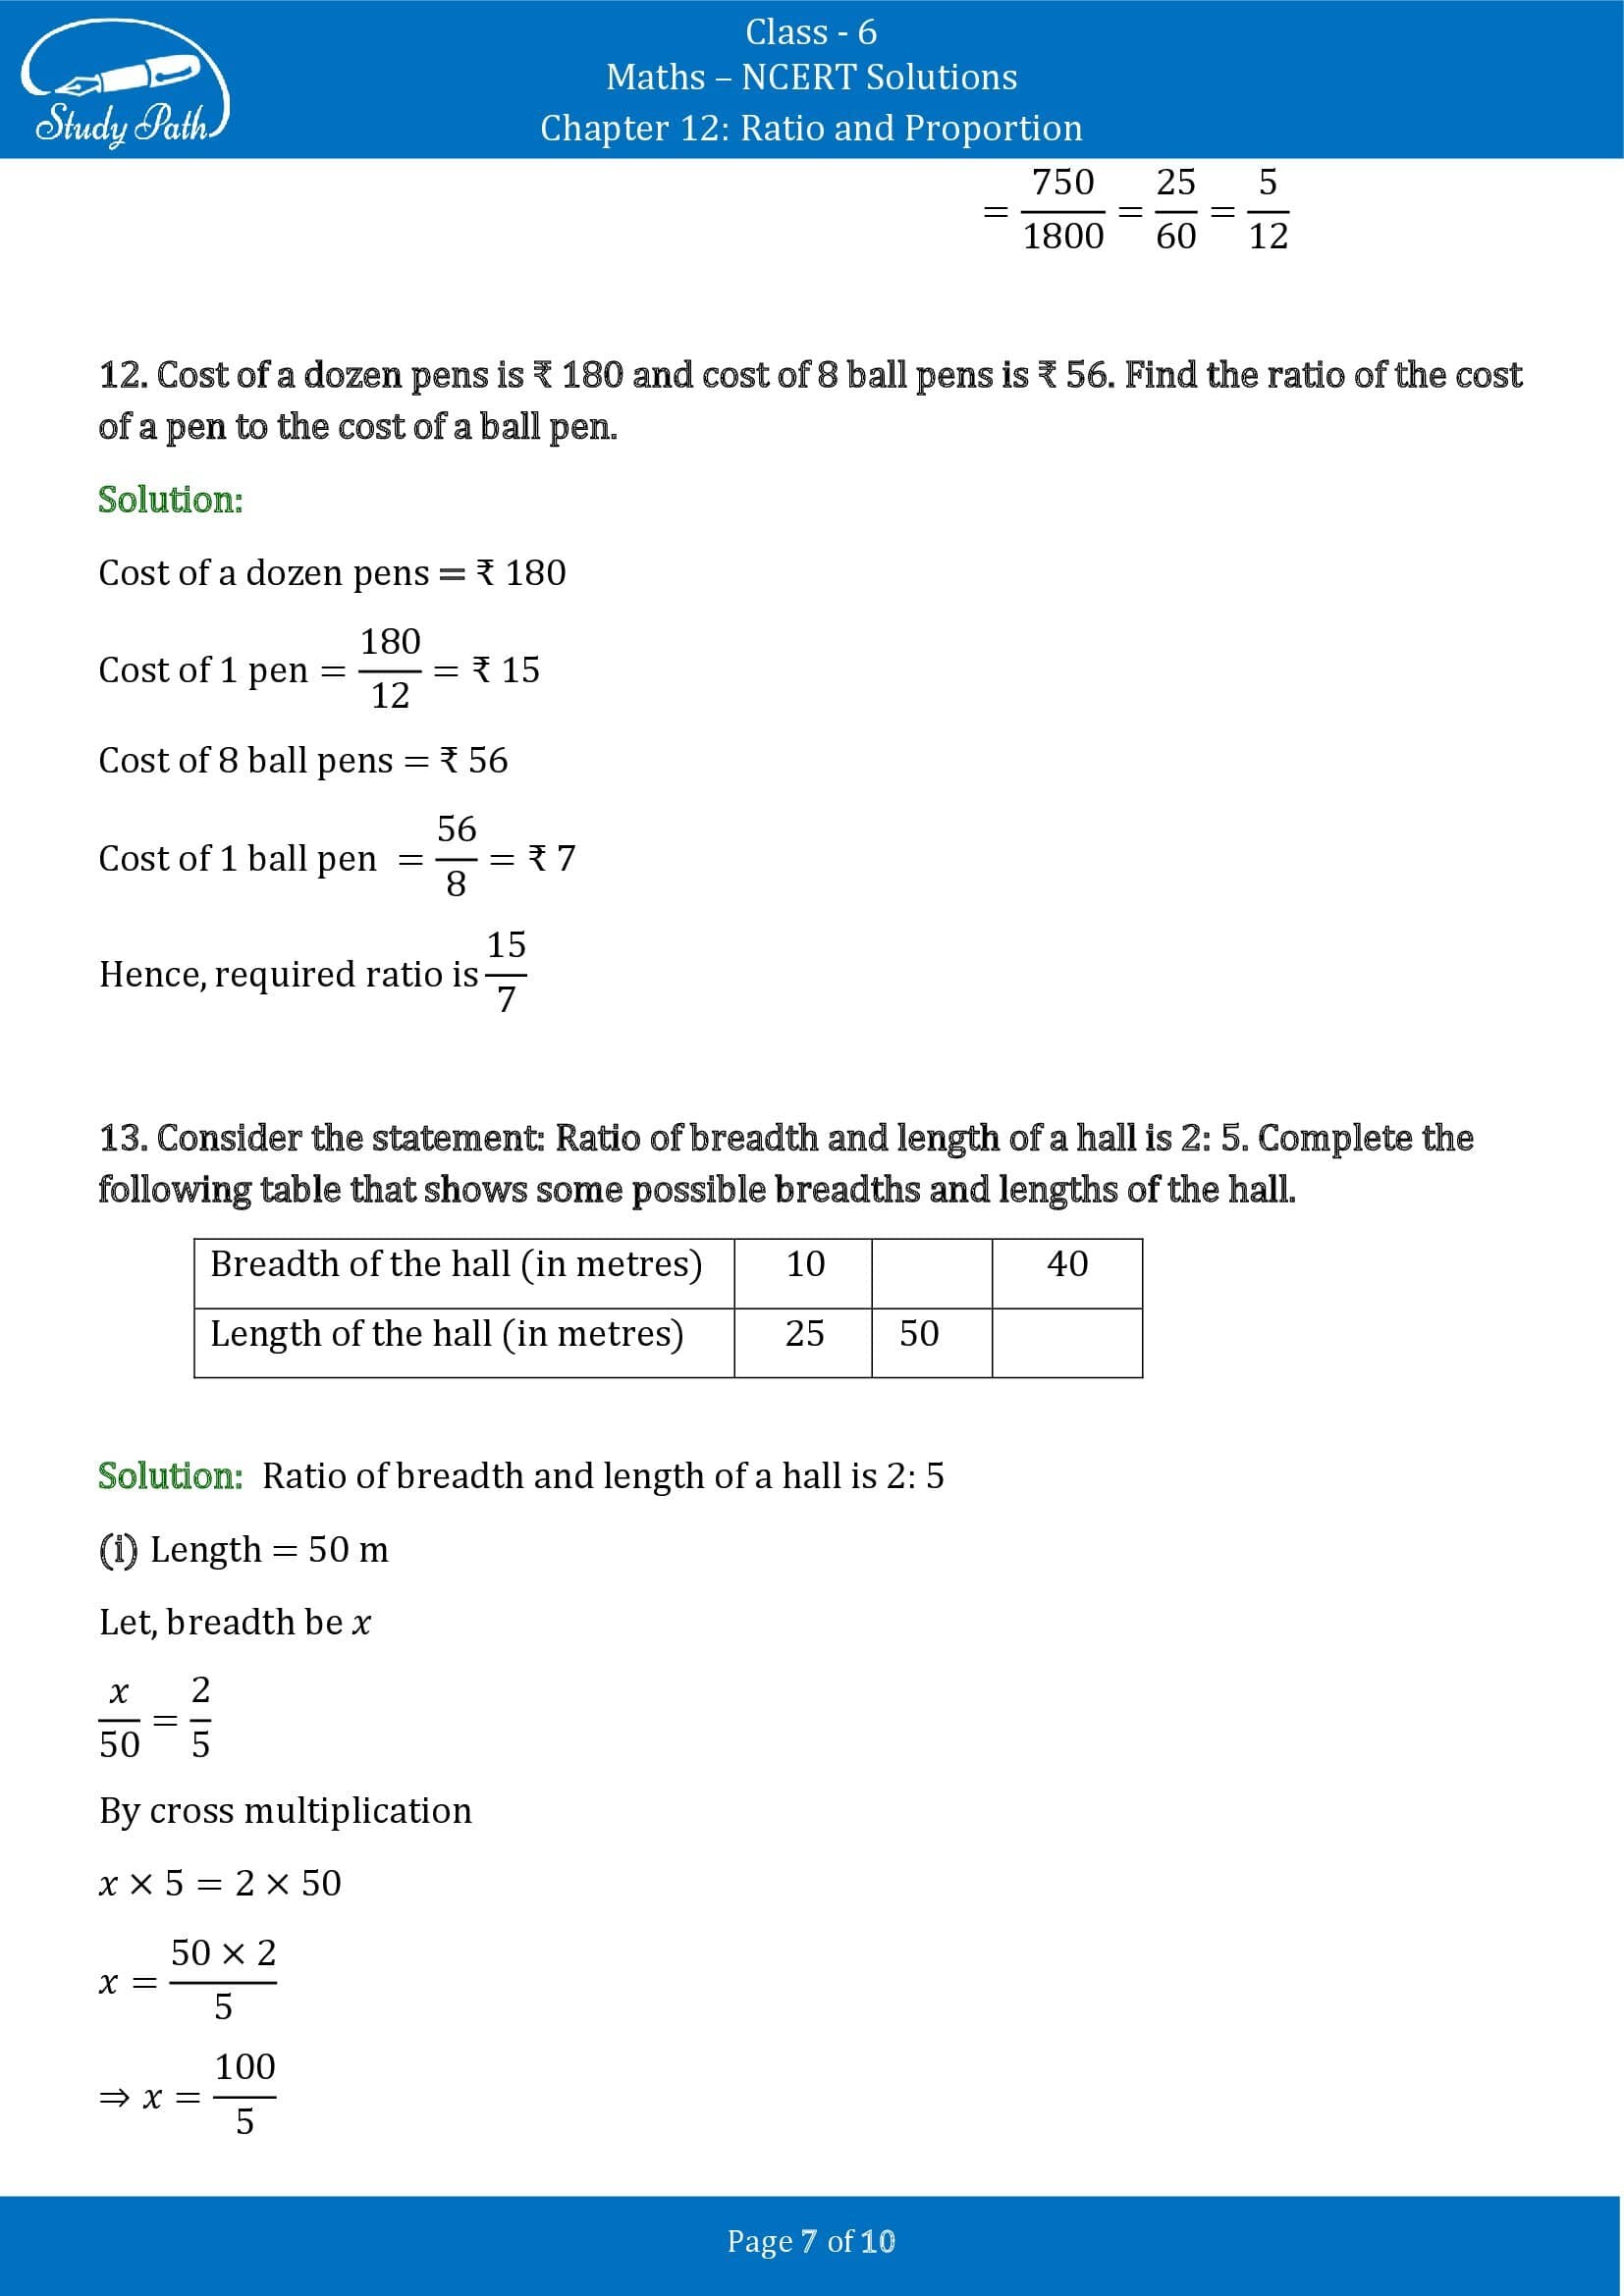 NCERT Solutions for Class 6 Maths Chapter 12 Ratio and Proportion Exercise 12.1 00007